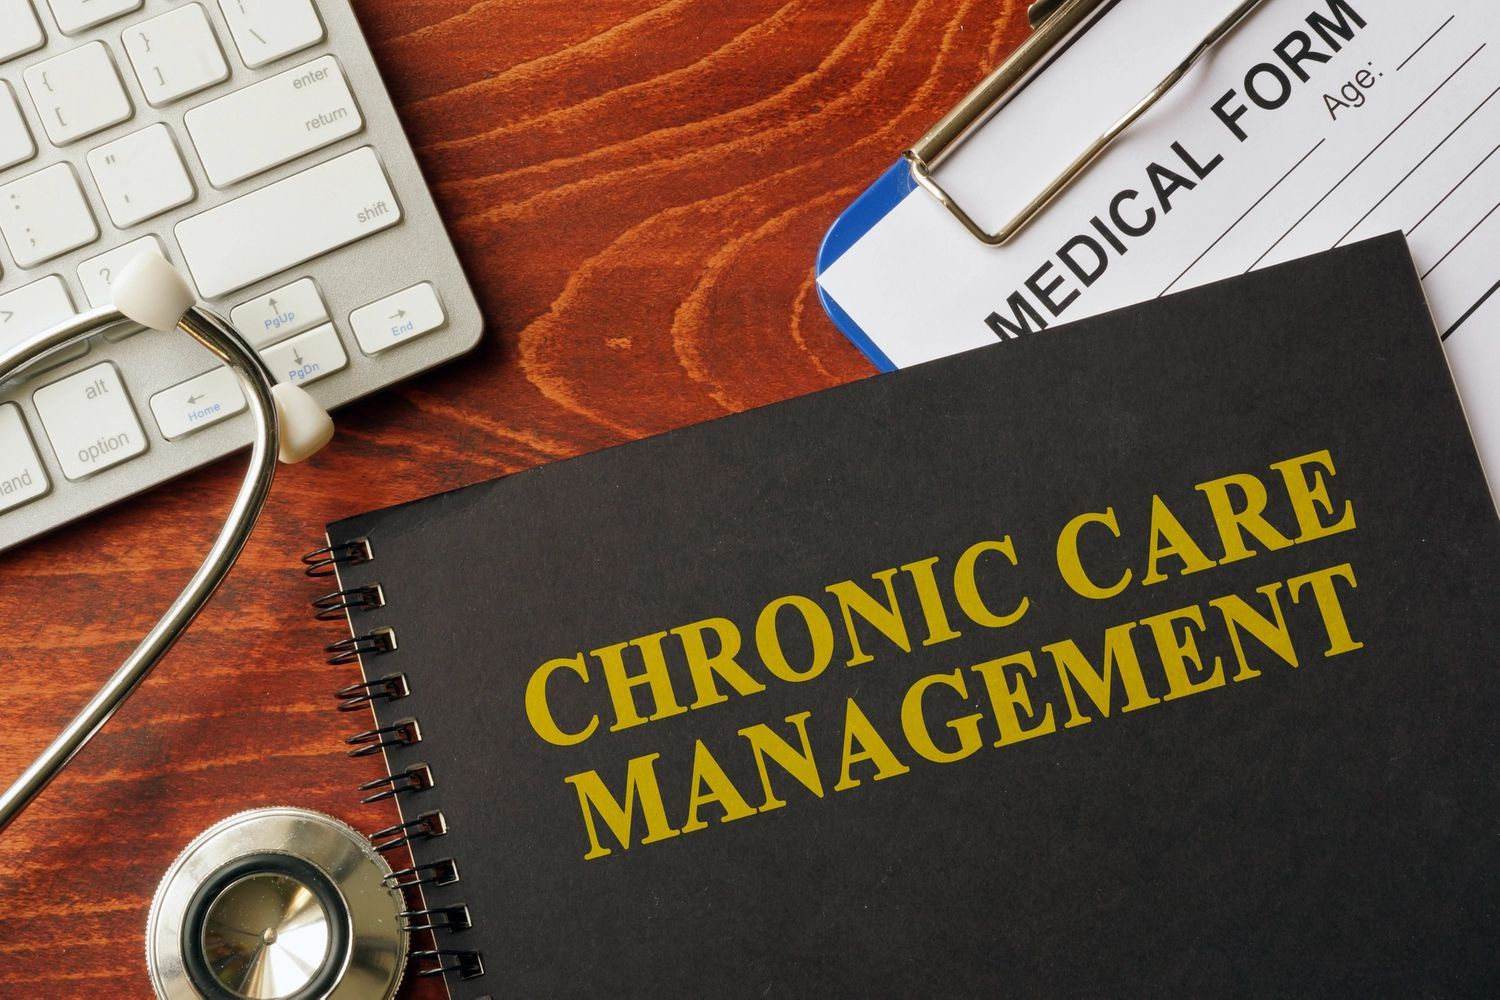 Care management processes for chronic diseases have held up …